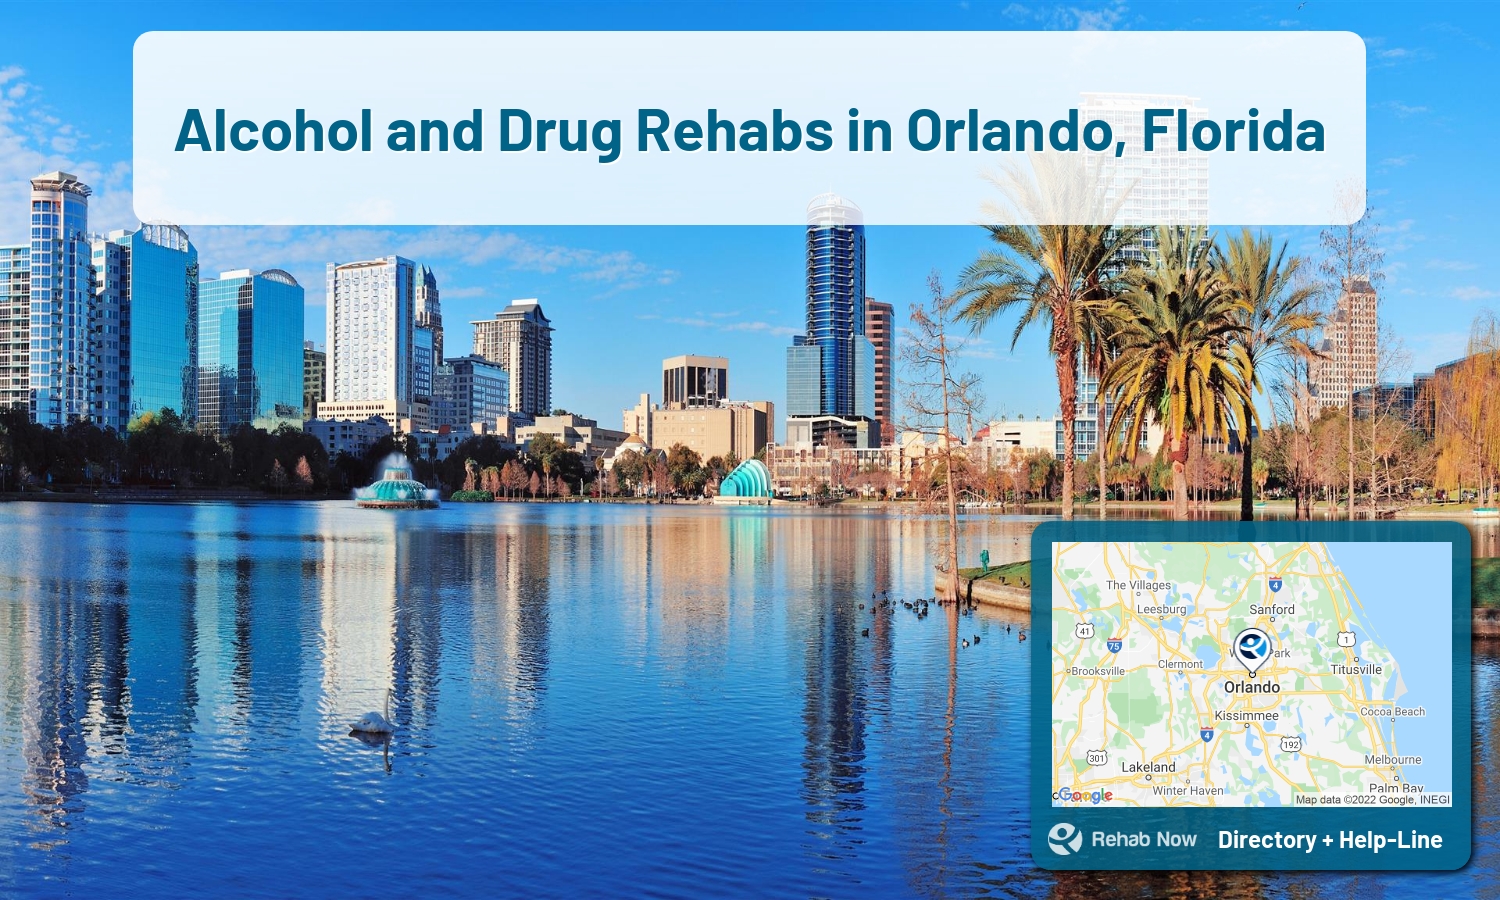 Orlando, FL Treatment Centers. Find drug rehab in Orlando, Florida, or detox and treatment programs. Get the right help now!